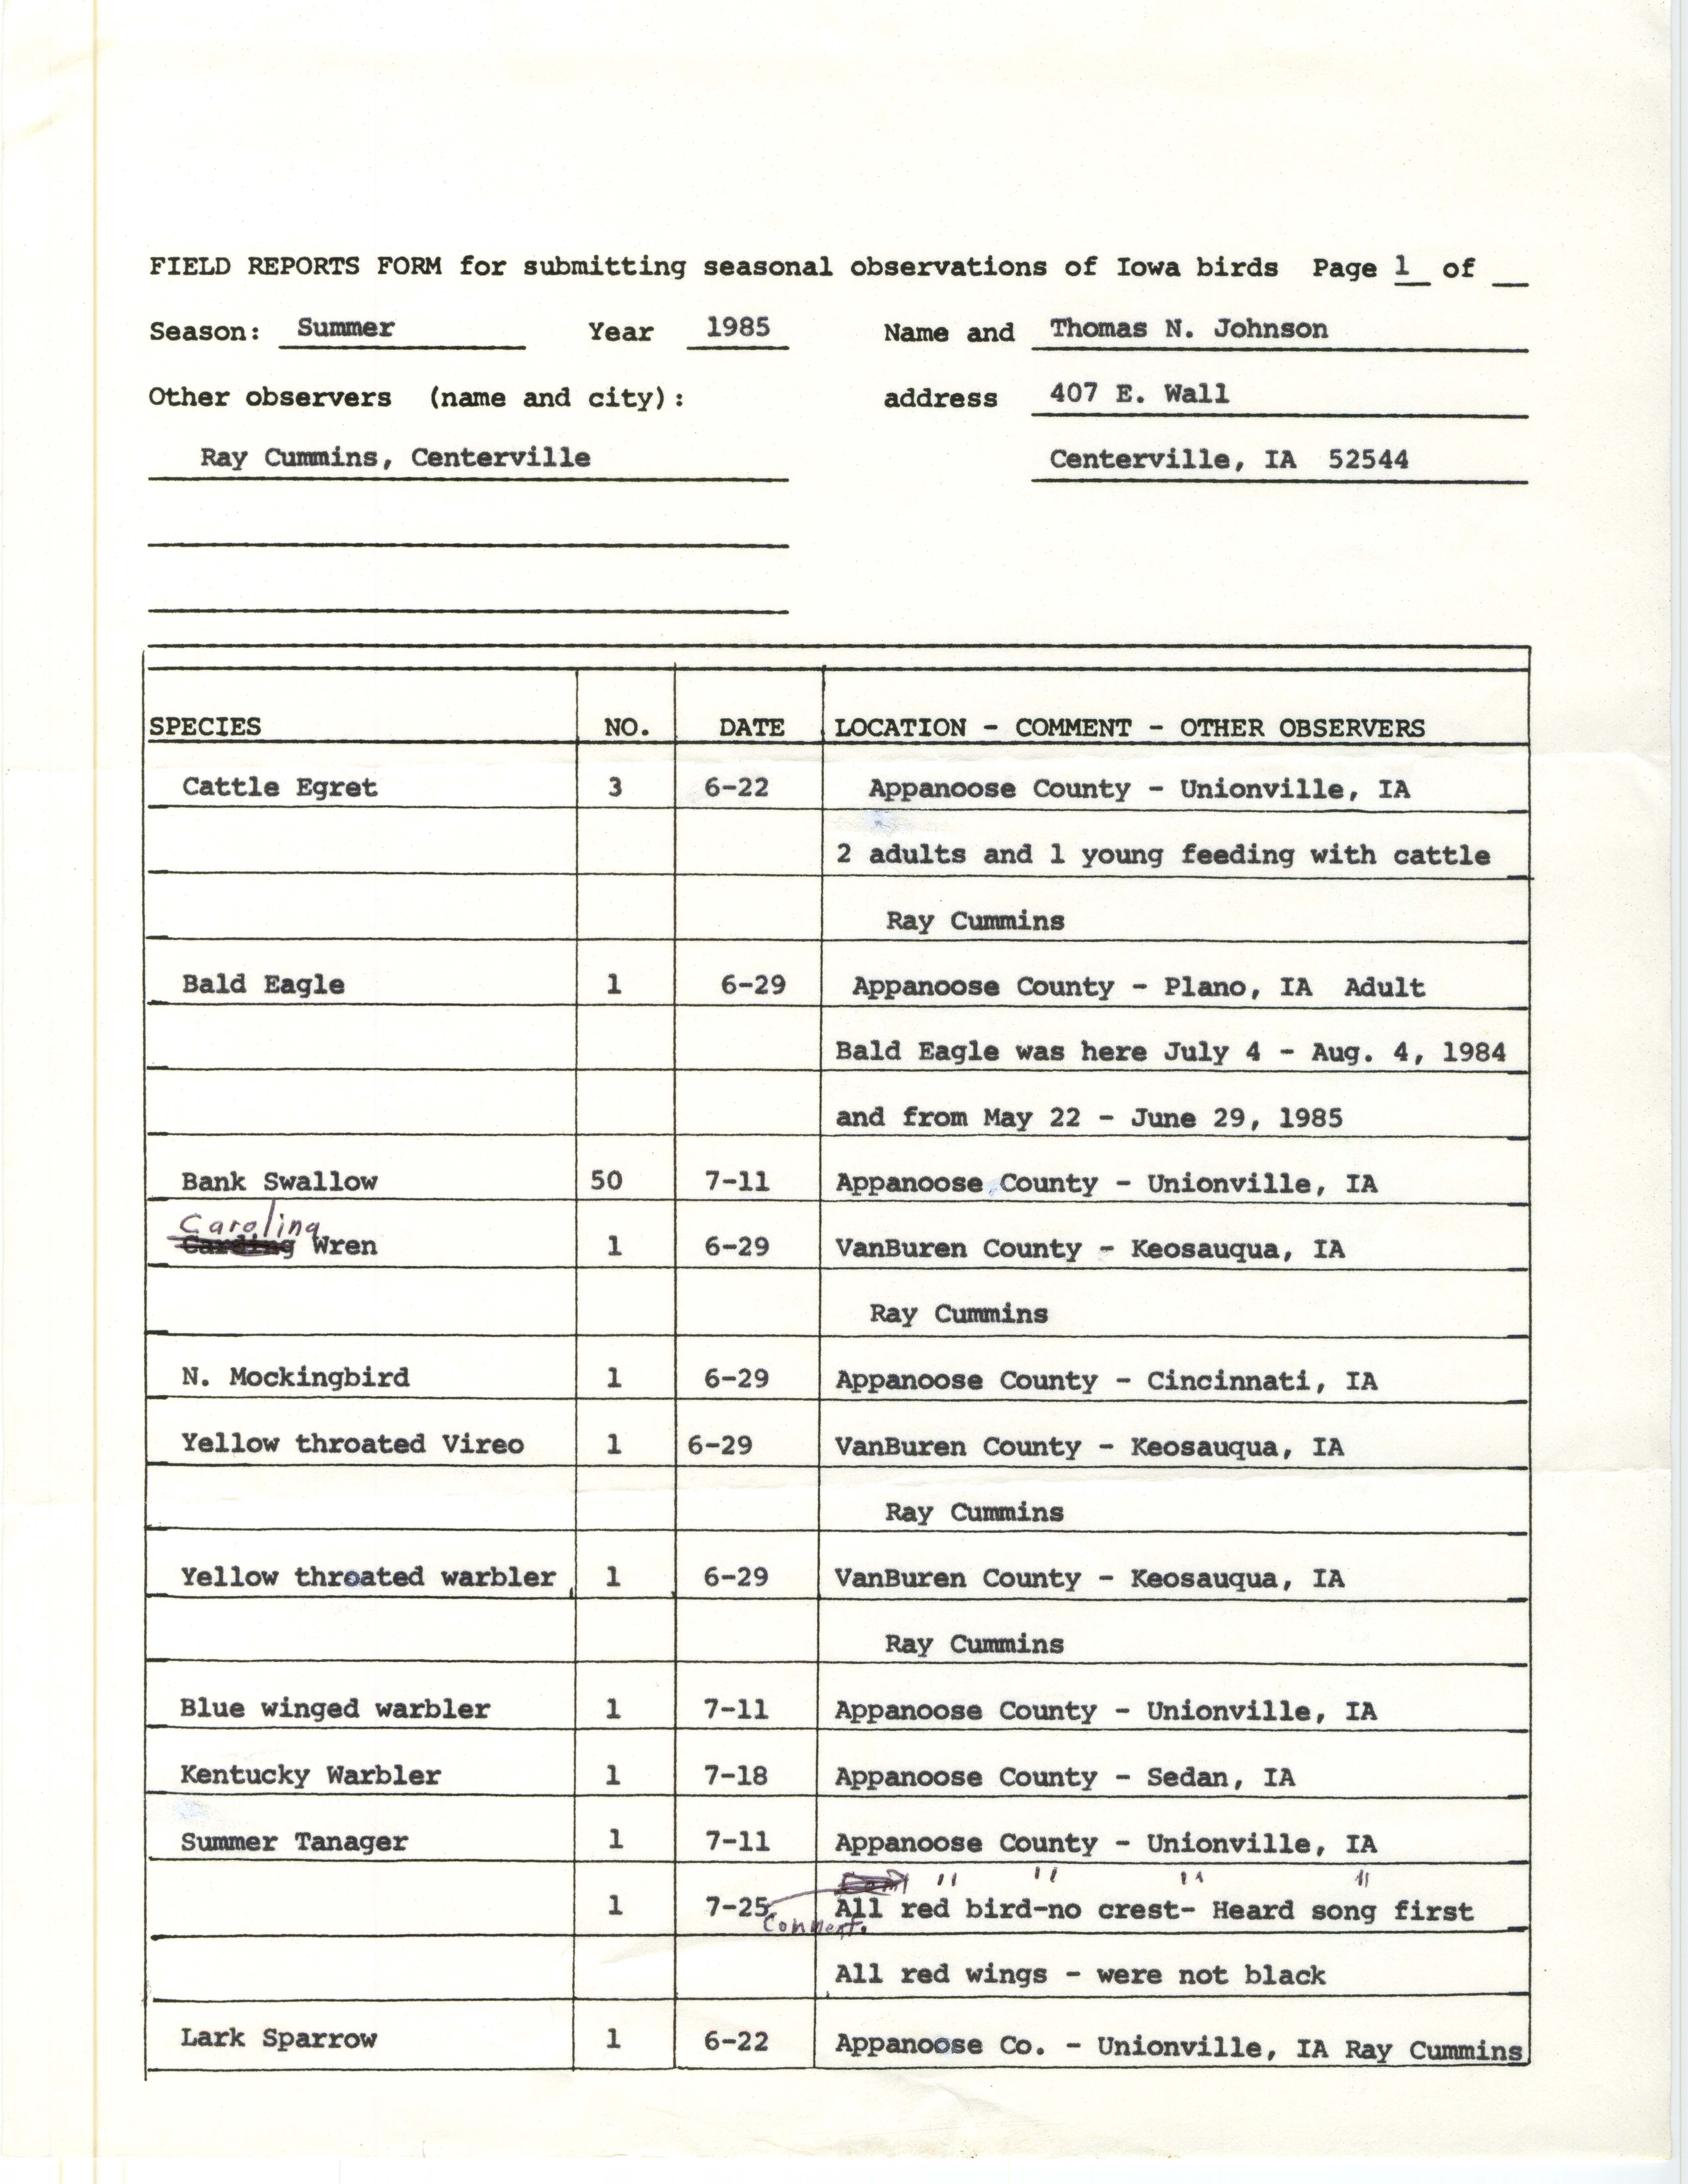 Field reports form for submitting seasonal observations of Iowa birds, Tom Johnson, summer 1985